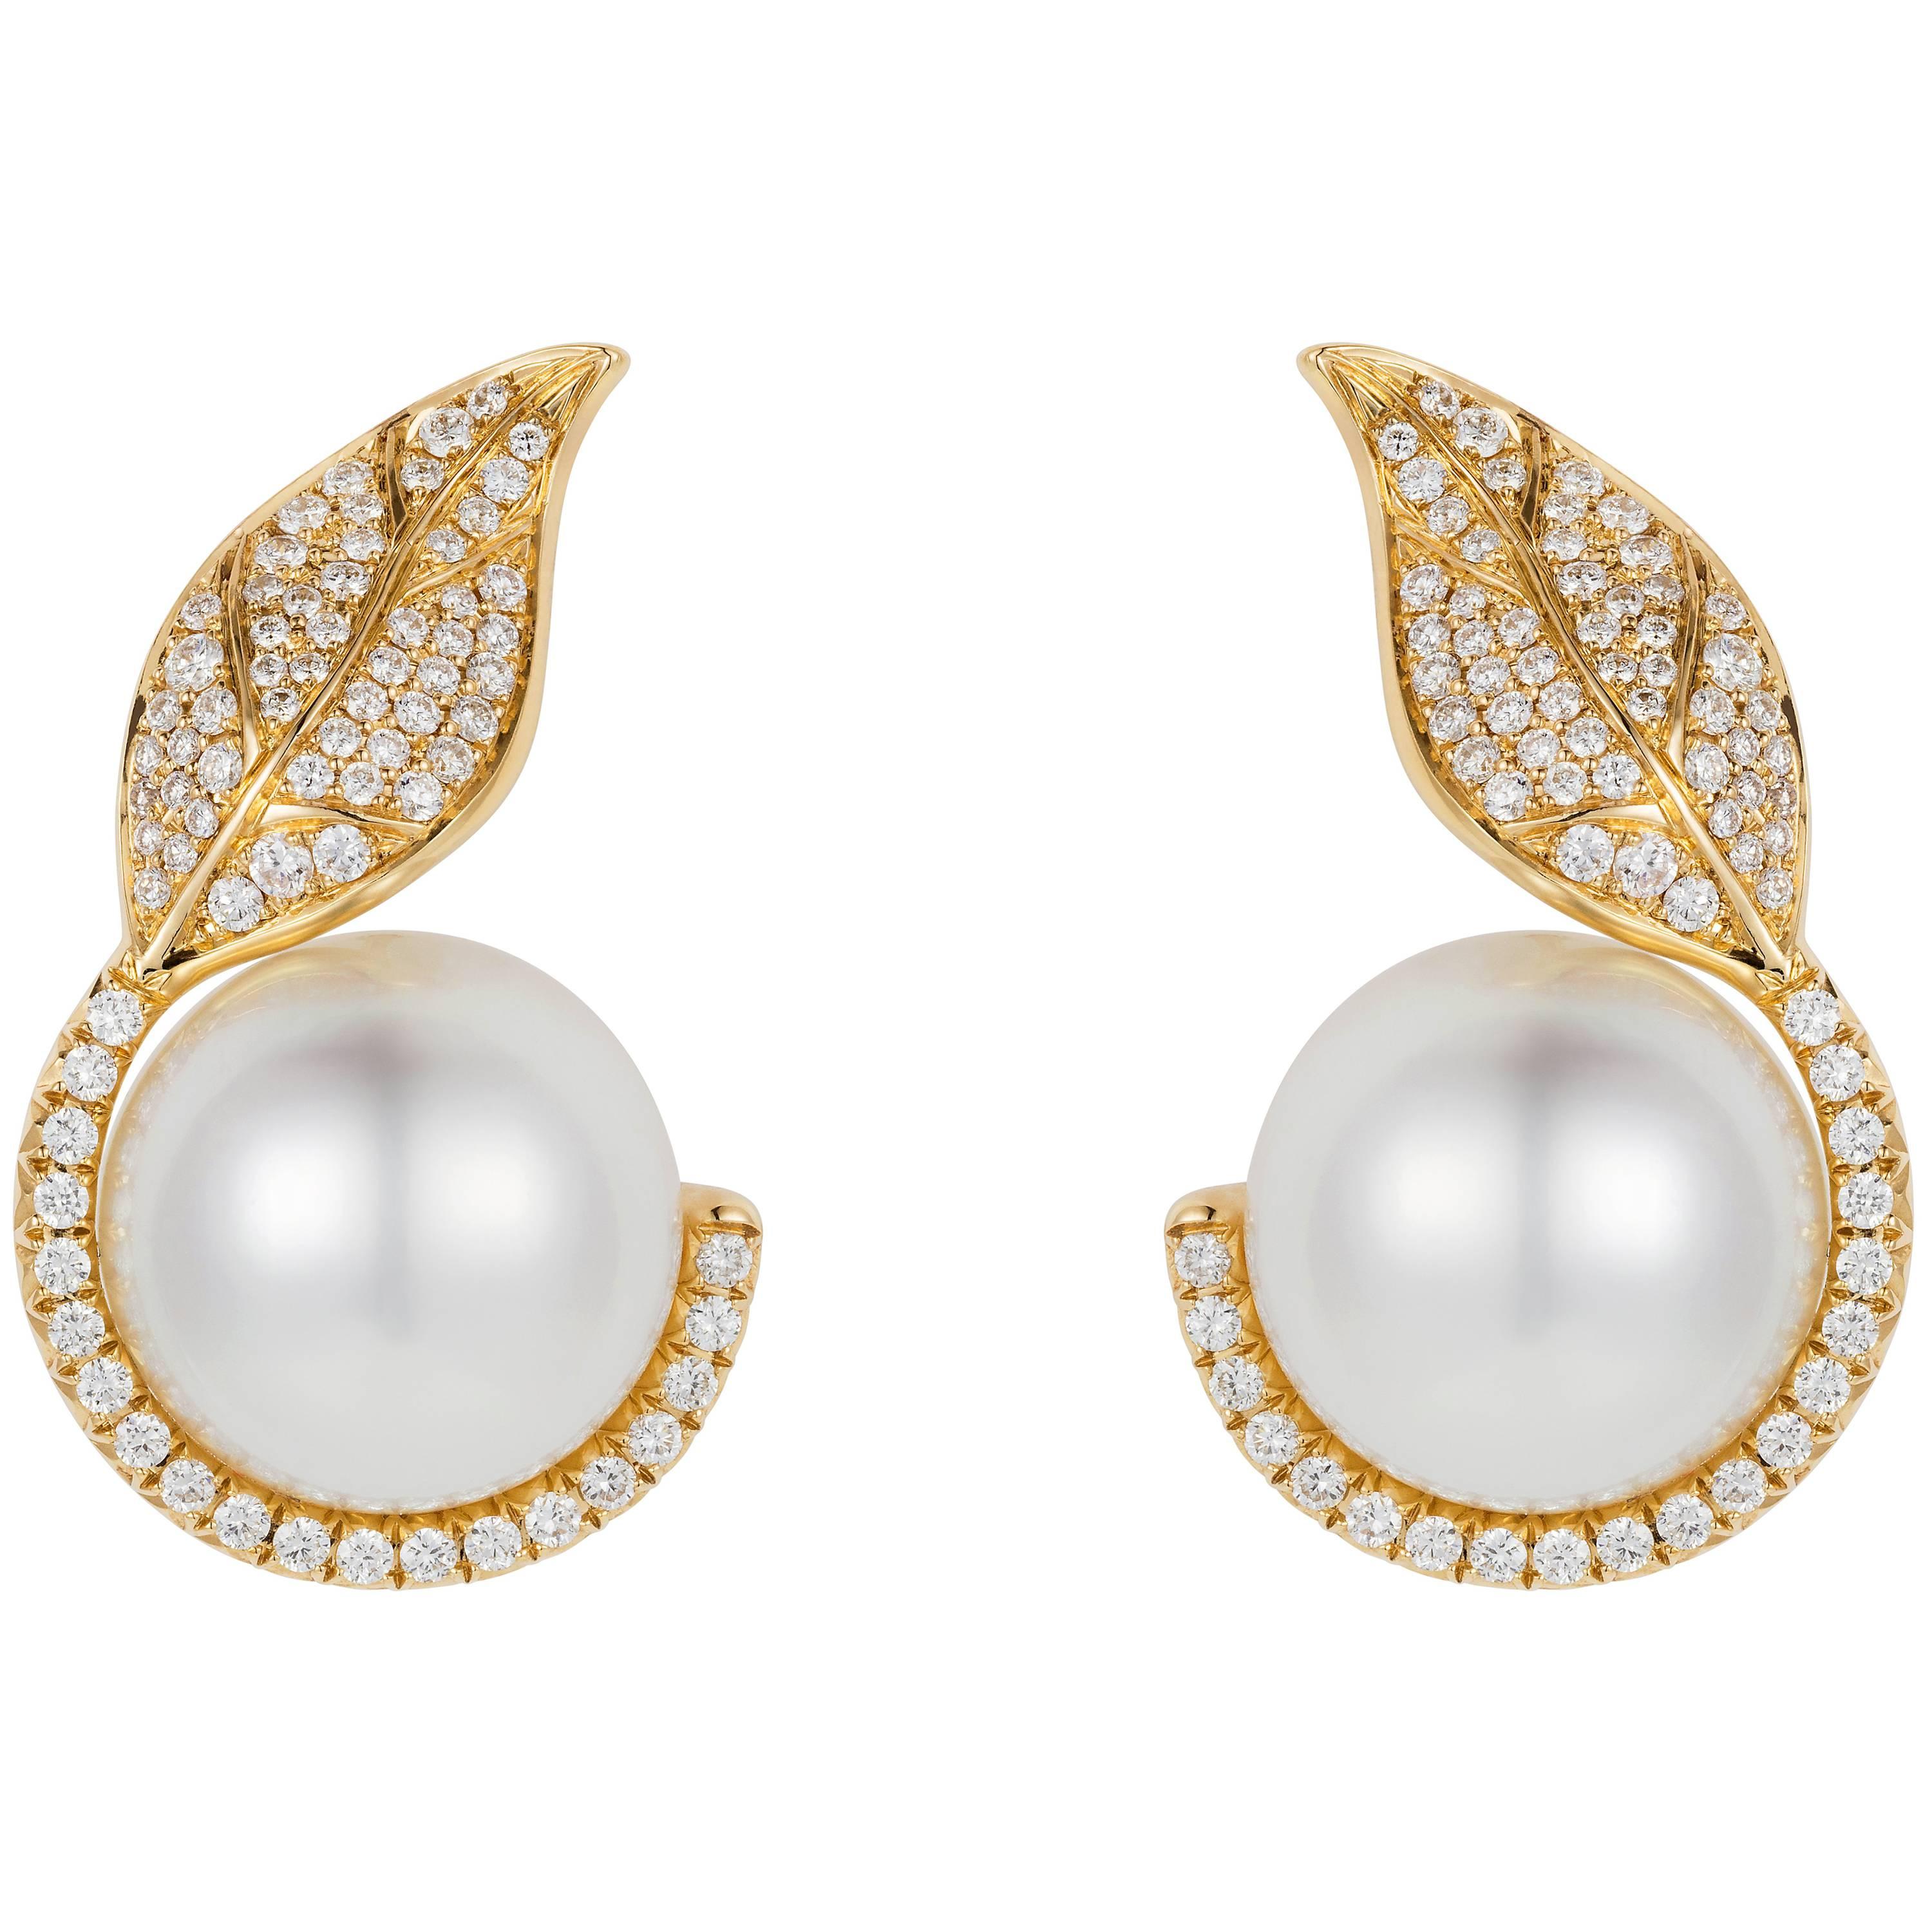 Nadine Aysoy 18K Yellow Gold, White Diamond and South Sea Pearl Stud Earrings For Sale